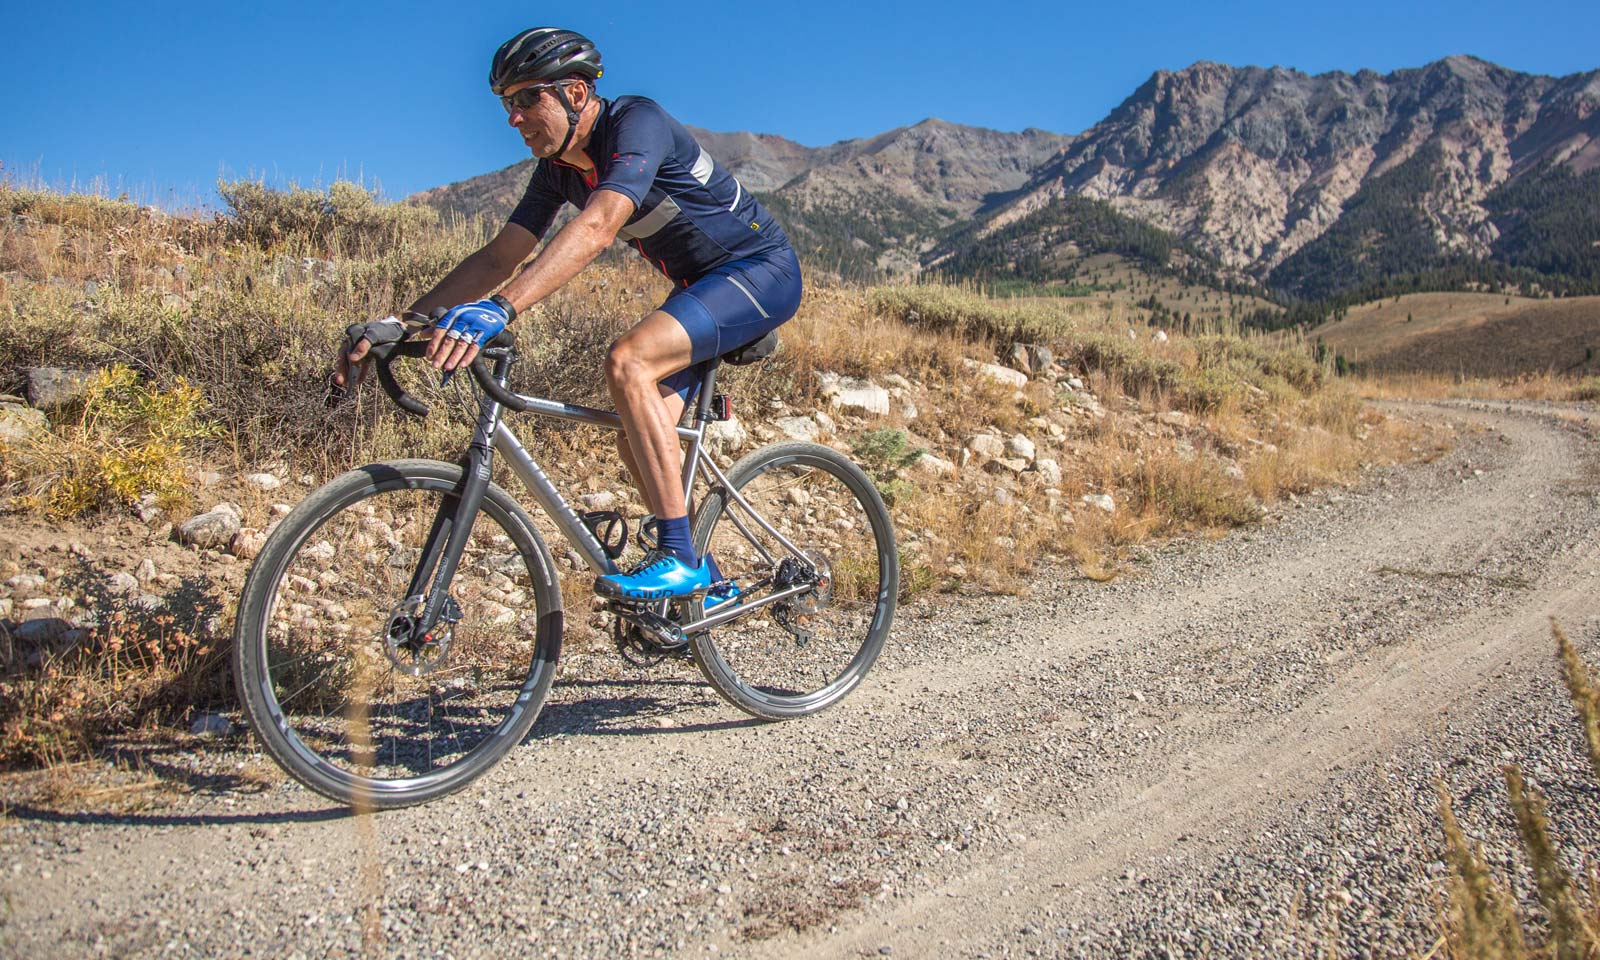 Litespeed Gravel Ultimate is an aero speedster to quickly tame rough roads